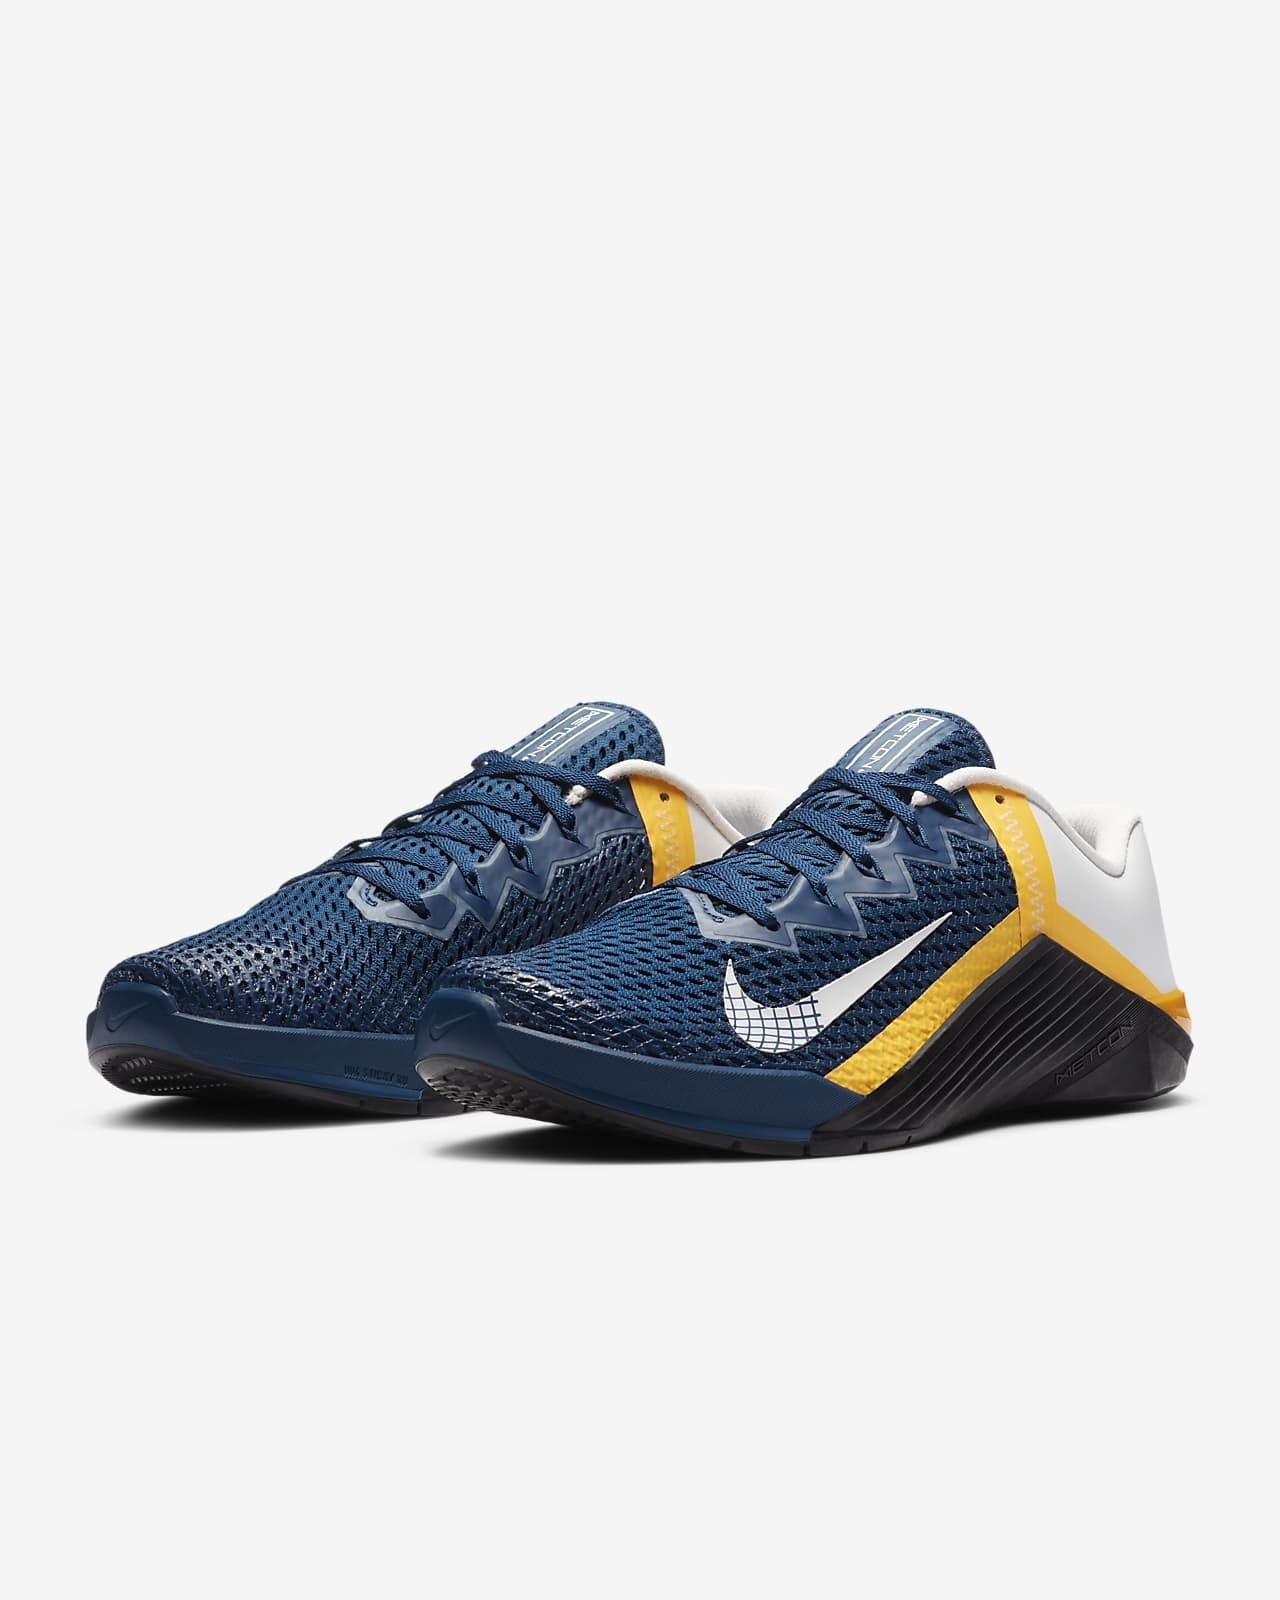 nike metcon blue and yellow